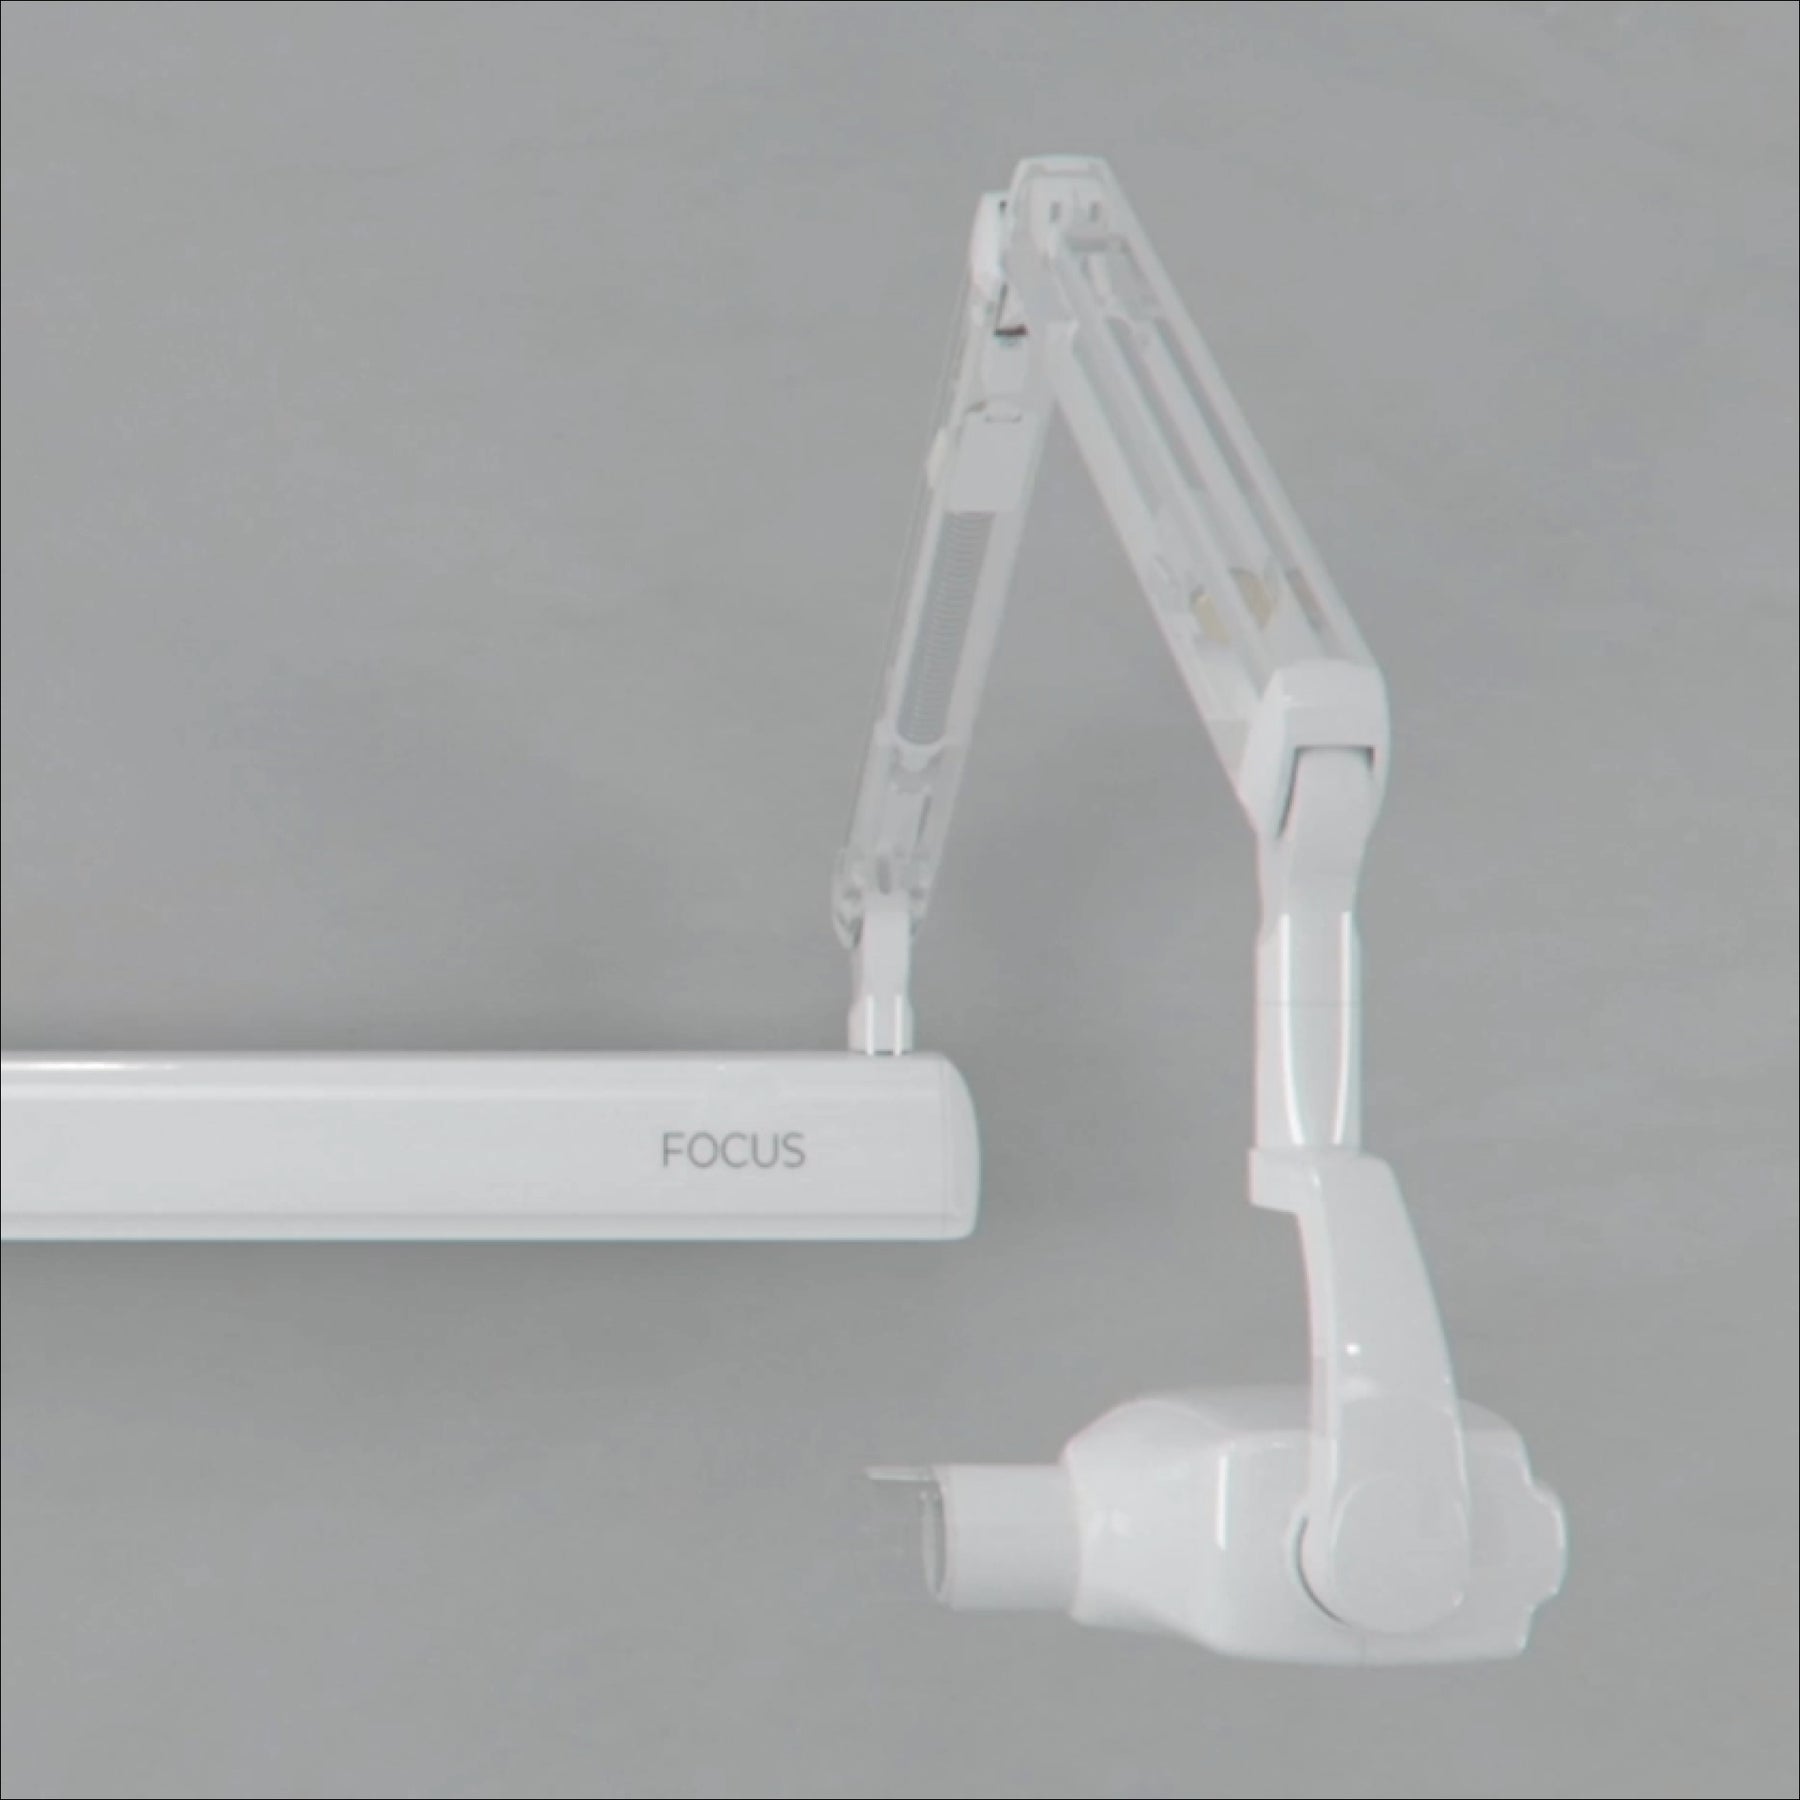 Dexis Focus Intraoral X-ray is extremely stable, yet amazingly light and easy-to-handle